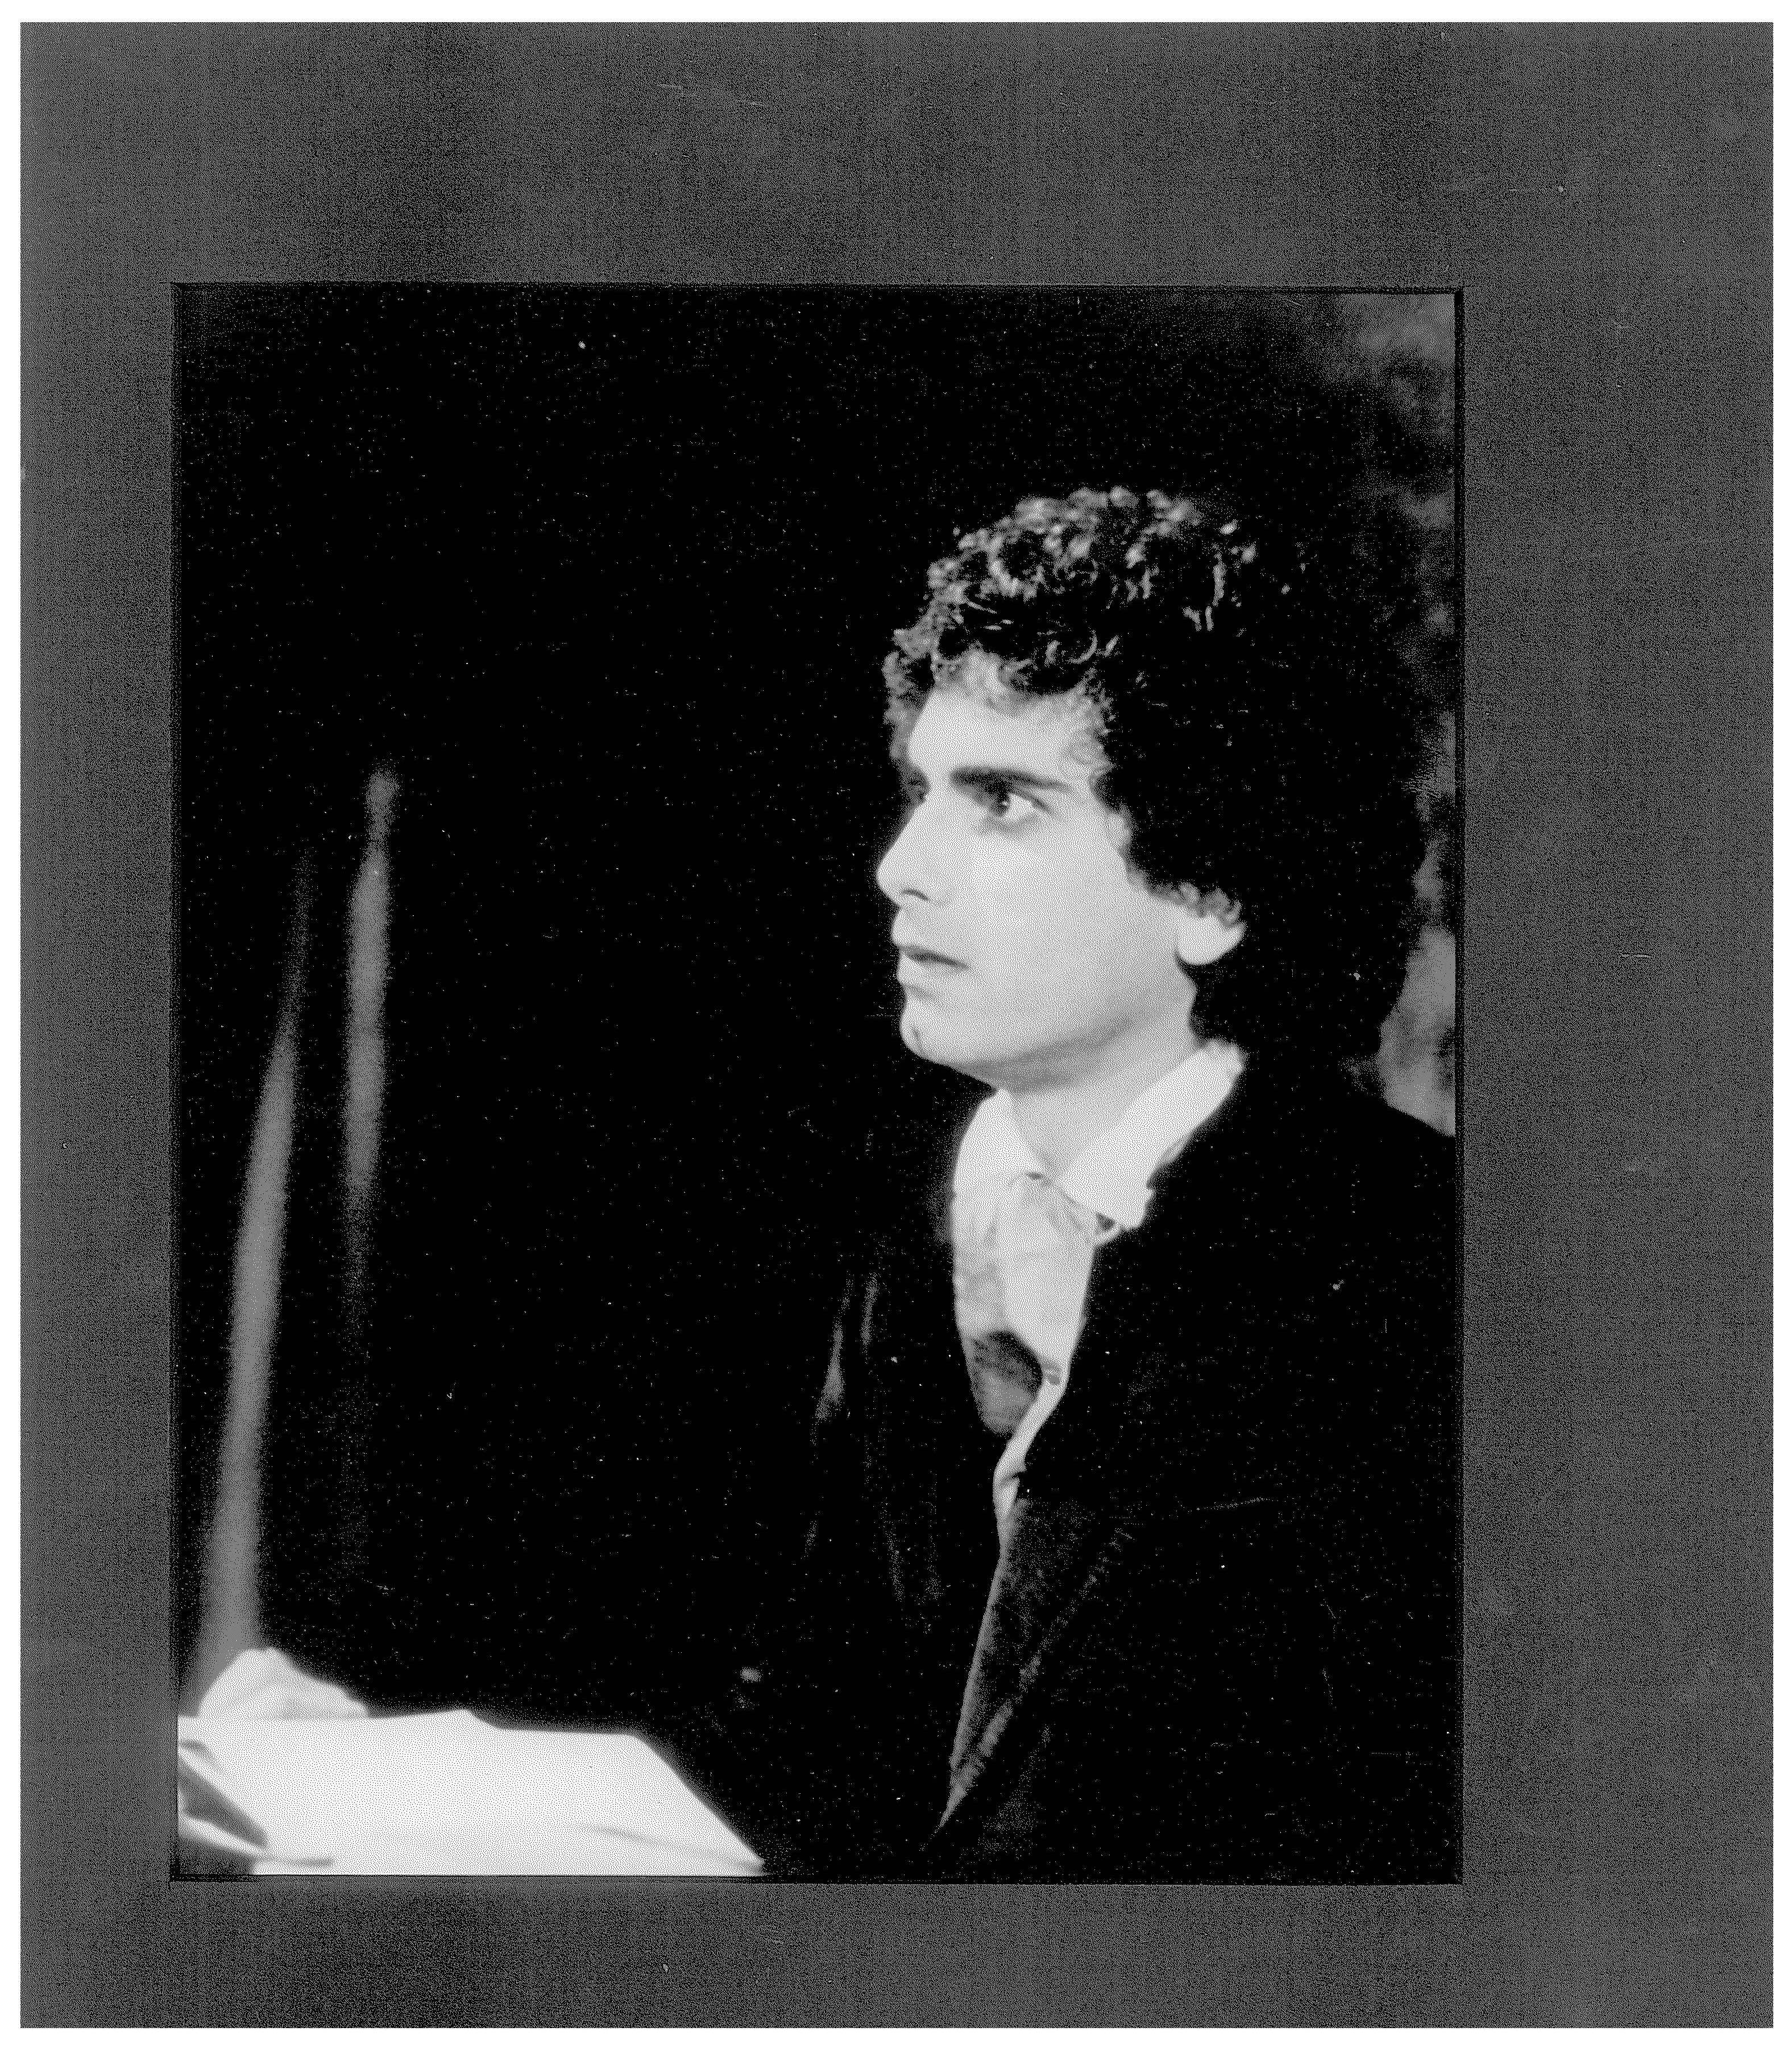 Steven Mastroieni in "Frankenstein," a world premiere at Scottsdale Community Players. (Photo from the collection of Steven Mastroieni)